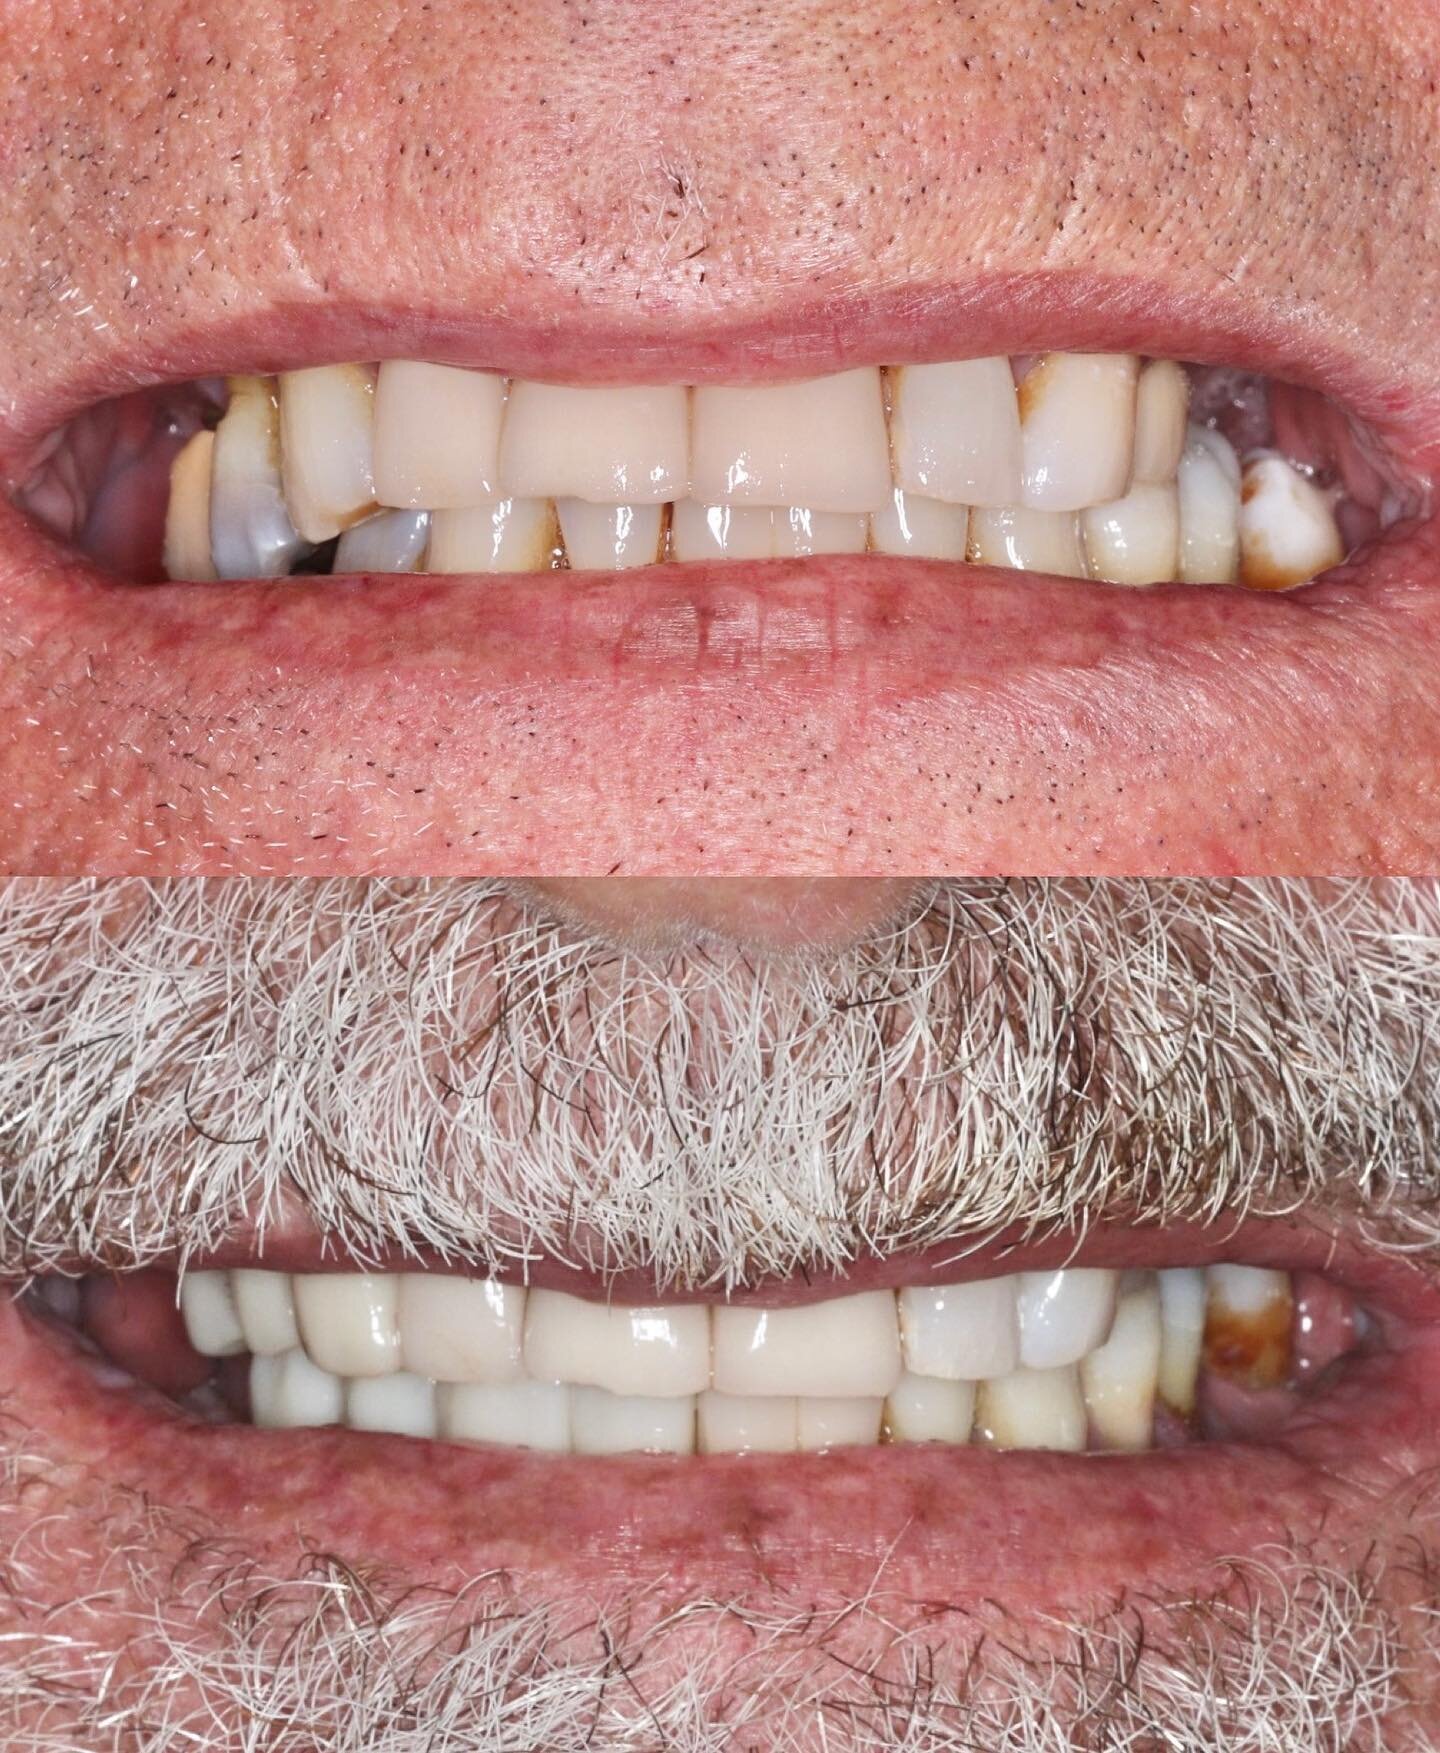 Patient concerned his teeth were &lsquo;drooping&rsquo; on the right. Failing teeth removed and smile line corrected with a tooth-borne bridge ☝️ and implant-borne bridge 👇

Can&rsquo;t take any credit for the beard 😉

Implant: @straumannuk 
Cerami